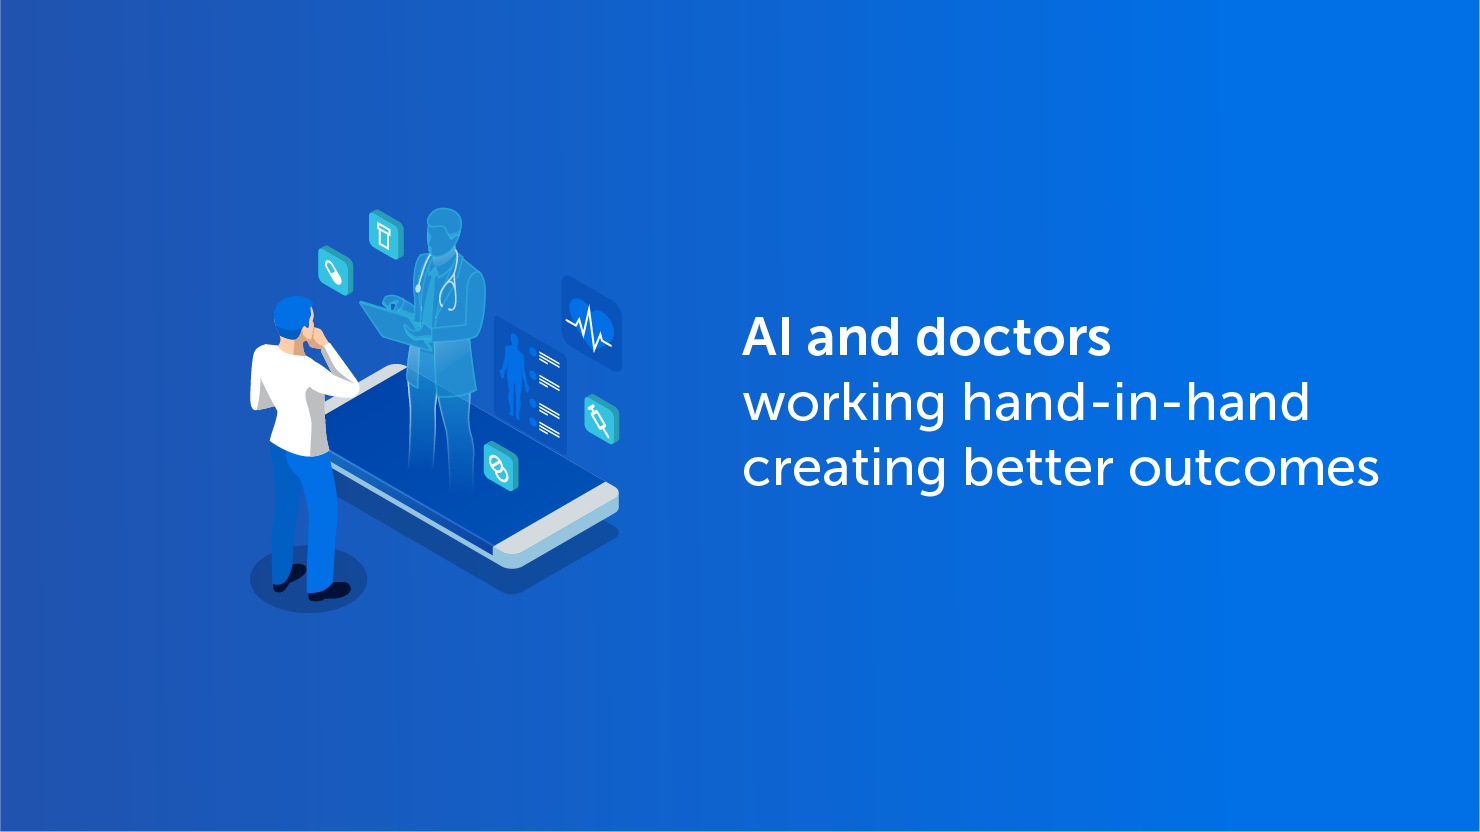 AI and doctors work collaboratively in creating better patients' experiences.